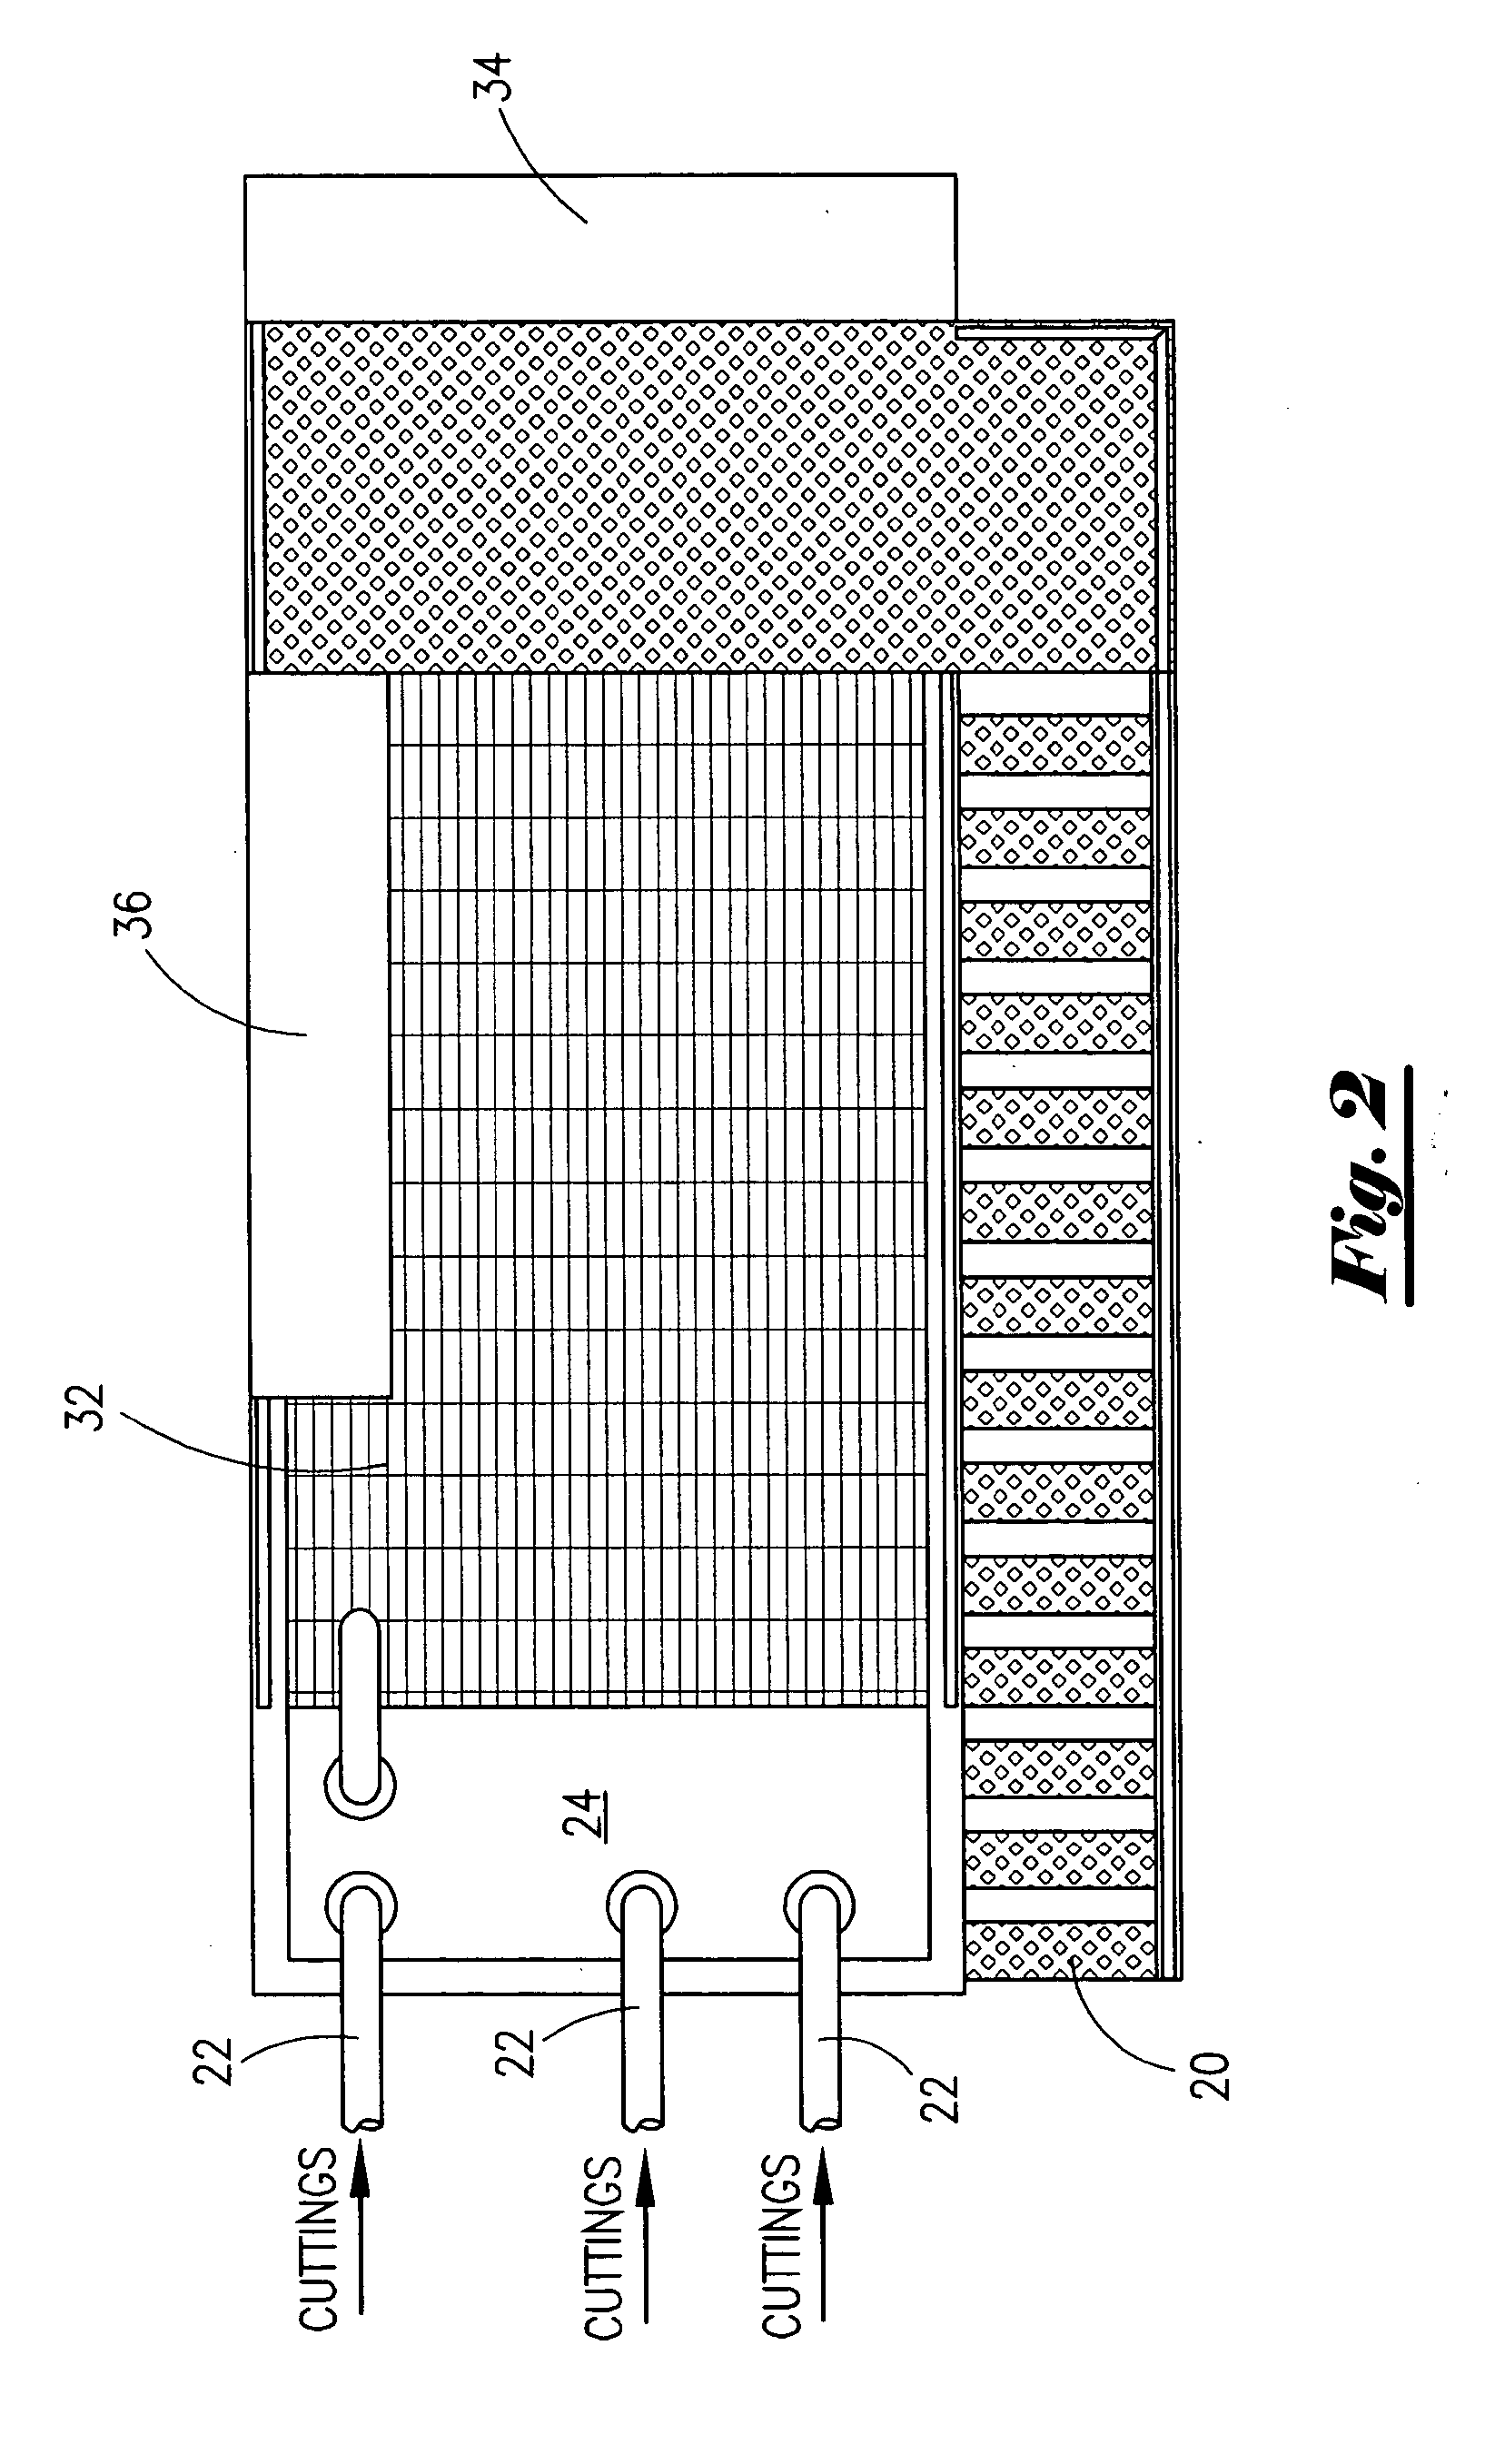 Method and Apparatus for Processing and Injecting Drill Cuttings